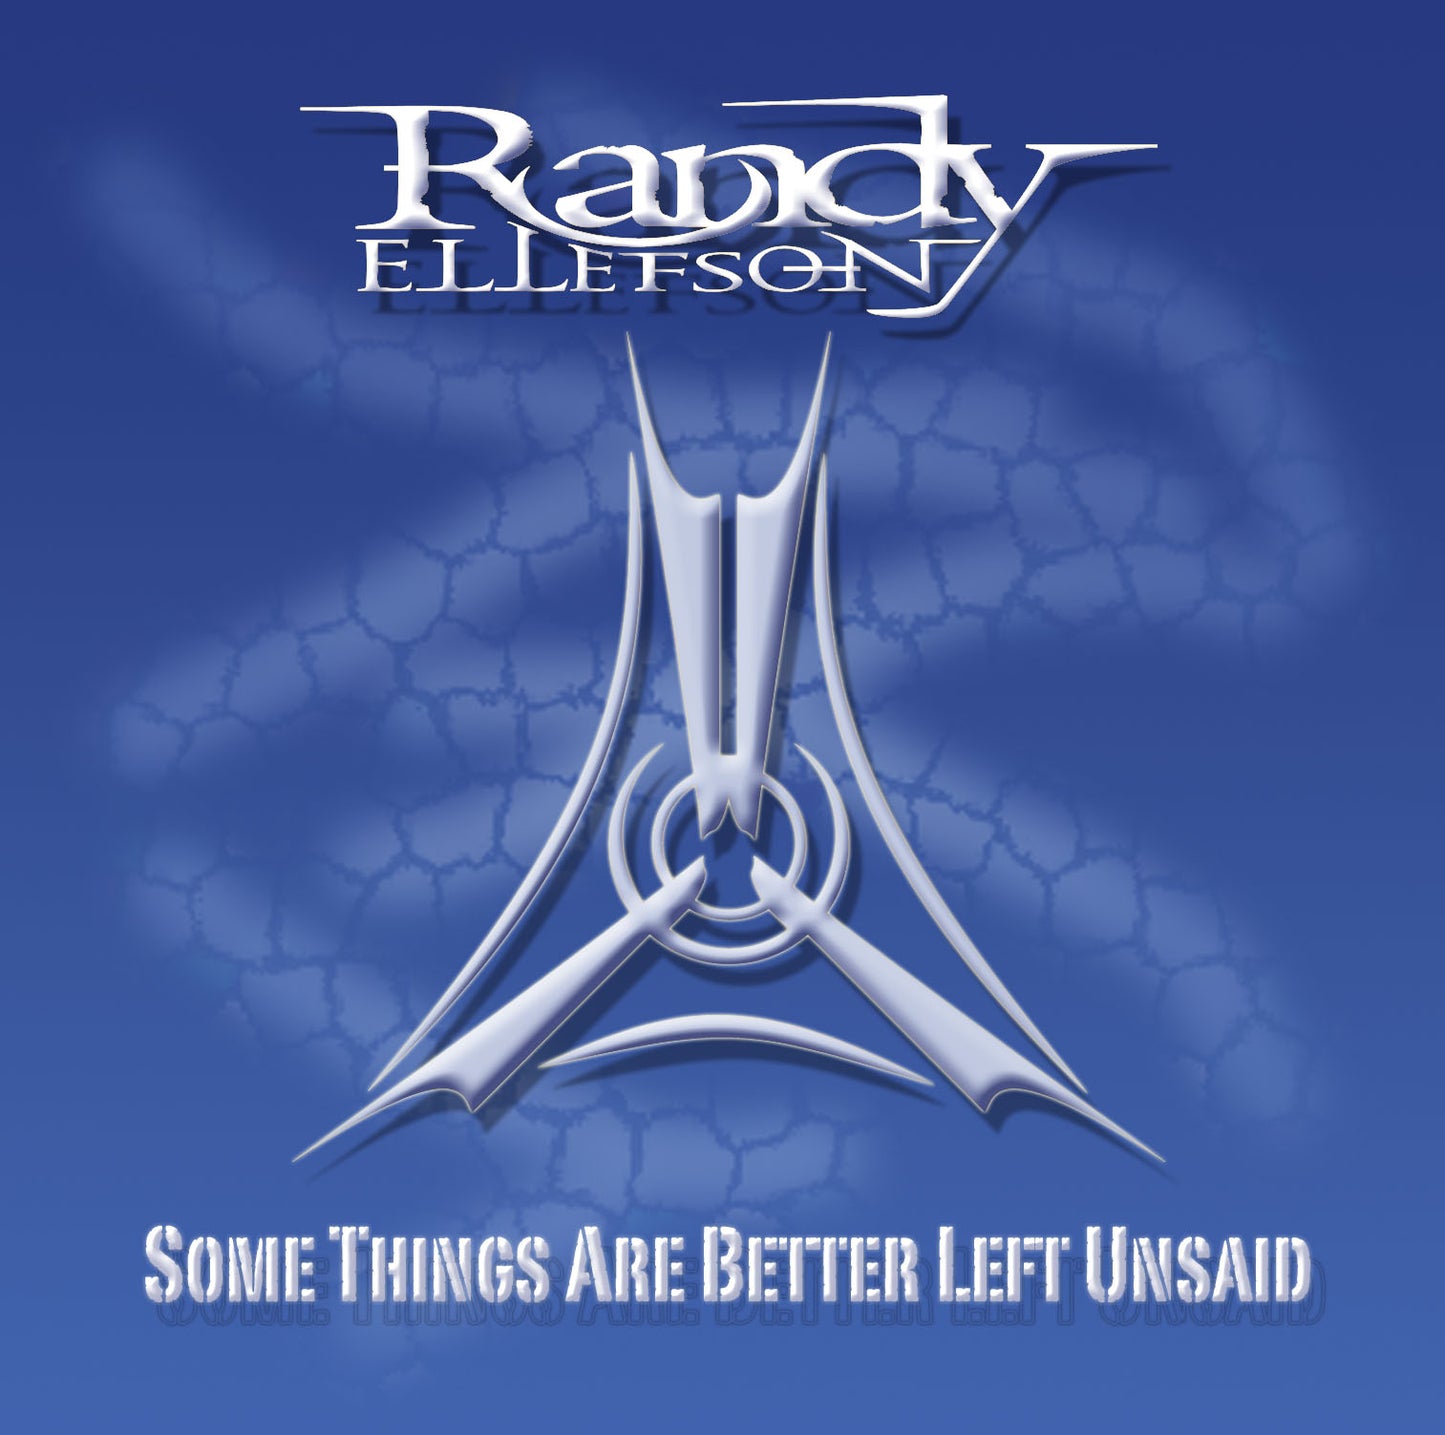 Some Things Are Better Left Unsaid, by Randy Ellefson